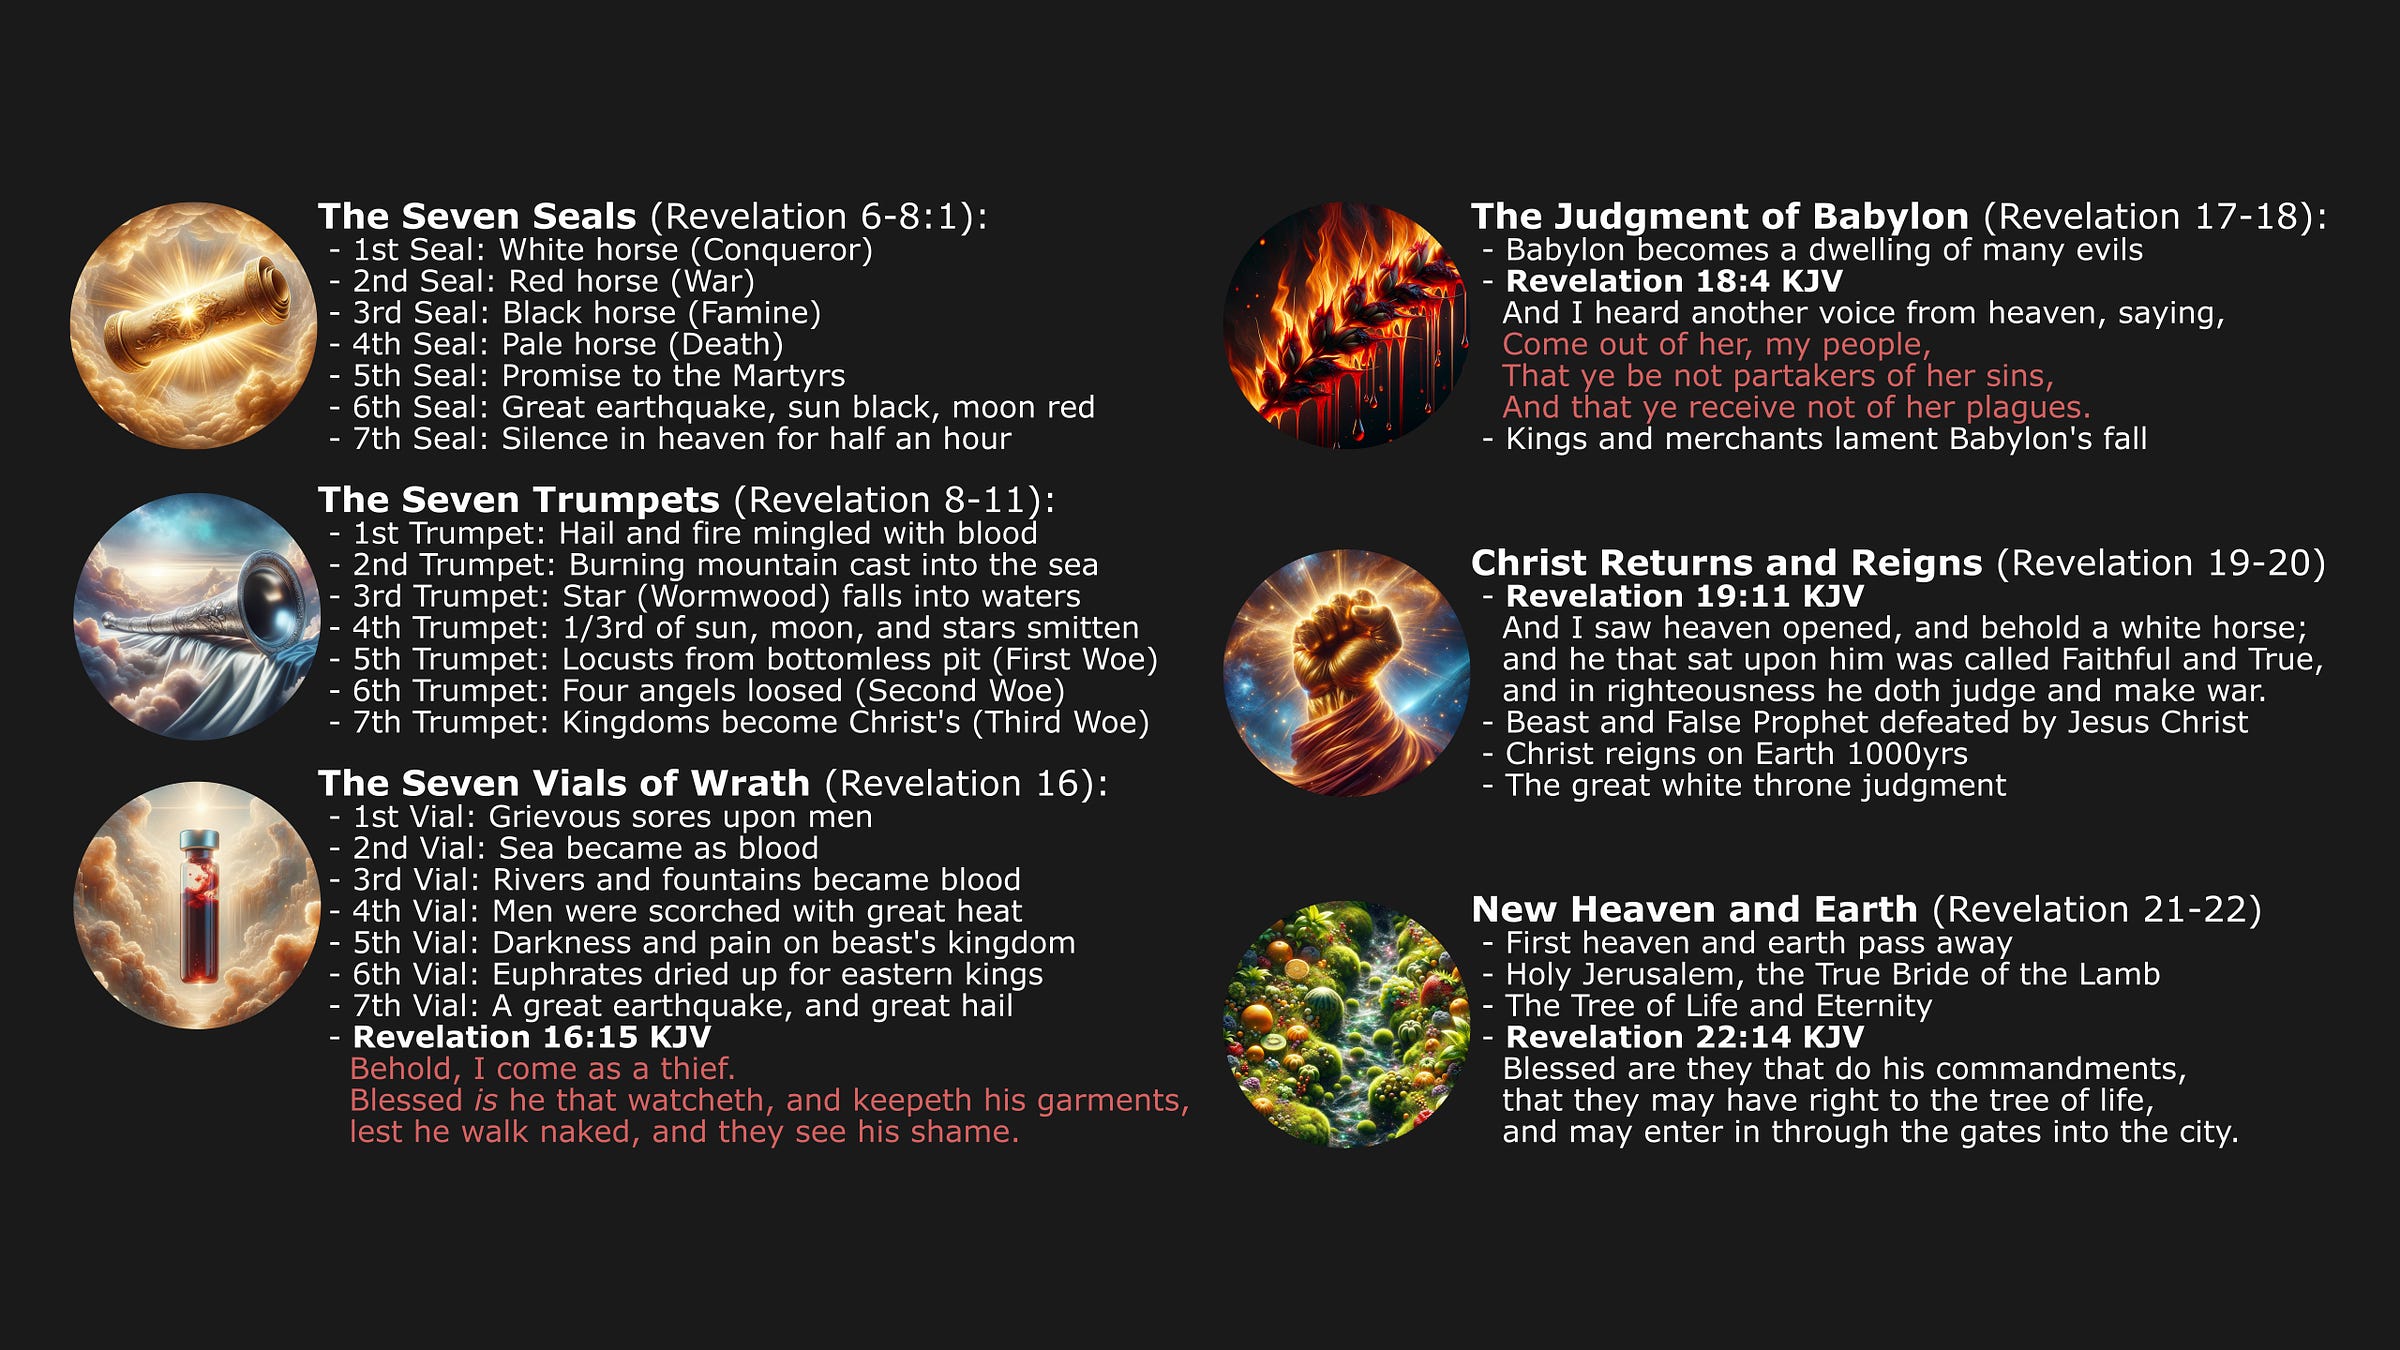 The image provides a summary of events from the Book of Revelation in the KJV Bible. It lists out the Seven Seals (Revelation 6-8:1), Seven Trumpets (Revelation 8-11), Seven Vials of Wrath (Revelation 16), the Judgment of Babylon (Revelation 17-18), Christ's Return and Reign (Revelation 19-20), and the New Heaven and Earth (Revelation 21-22).   For each set of events, the image provides brief descriptions, such as the First Seal being a white horse (Conqueror), the First Trumpet bringing hail and fire mingled with blood, the First Vial turning the sea to blood, Babylon becoming a dwelling place of evil, Christ returning on a white horse to reign for 1000 years, and the first heaven and earth passing away as a New Jerusalem and Earth are created.   The image also includes some specific verses, like Revelation 16:15 and 22:14, which speak of blessings for those who are watchful and obedient.